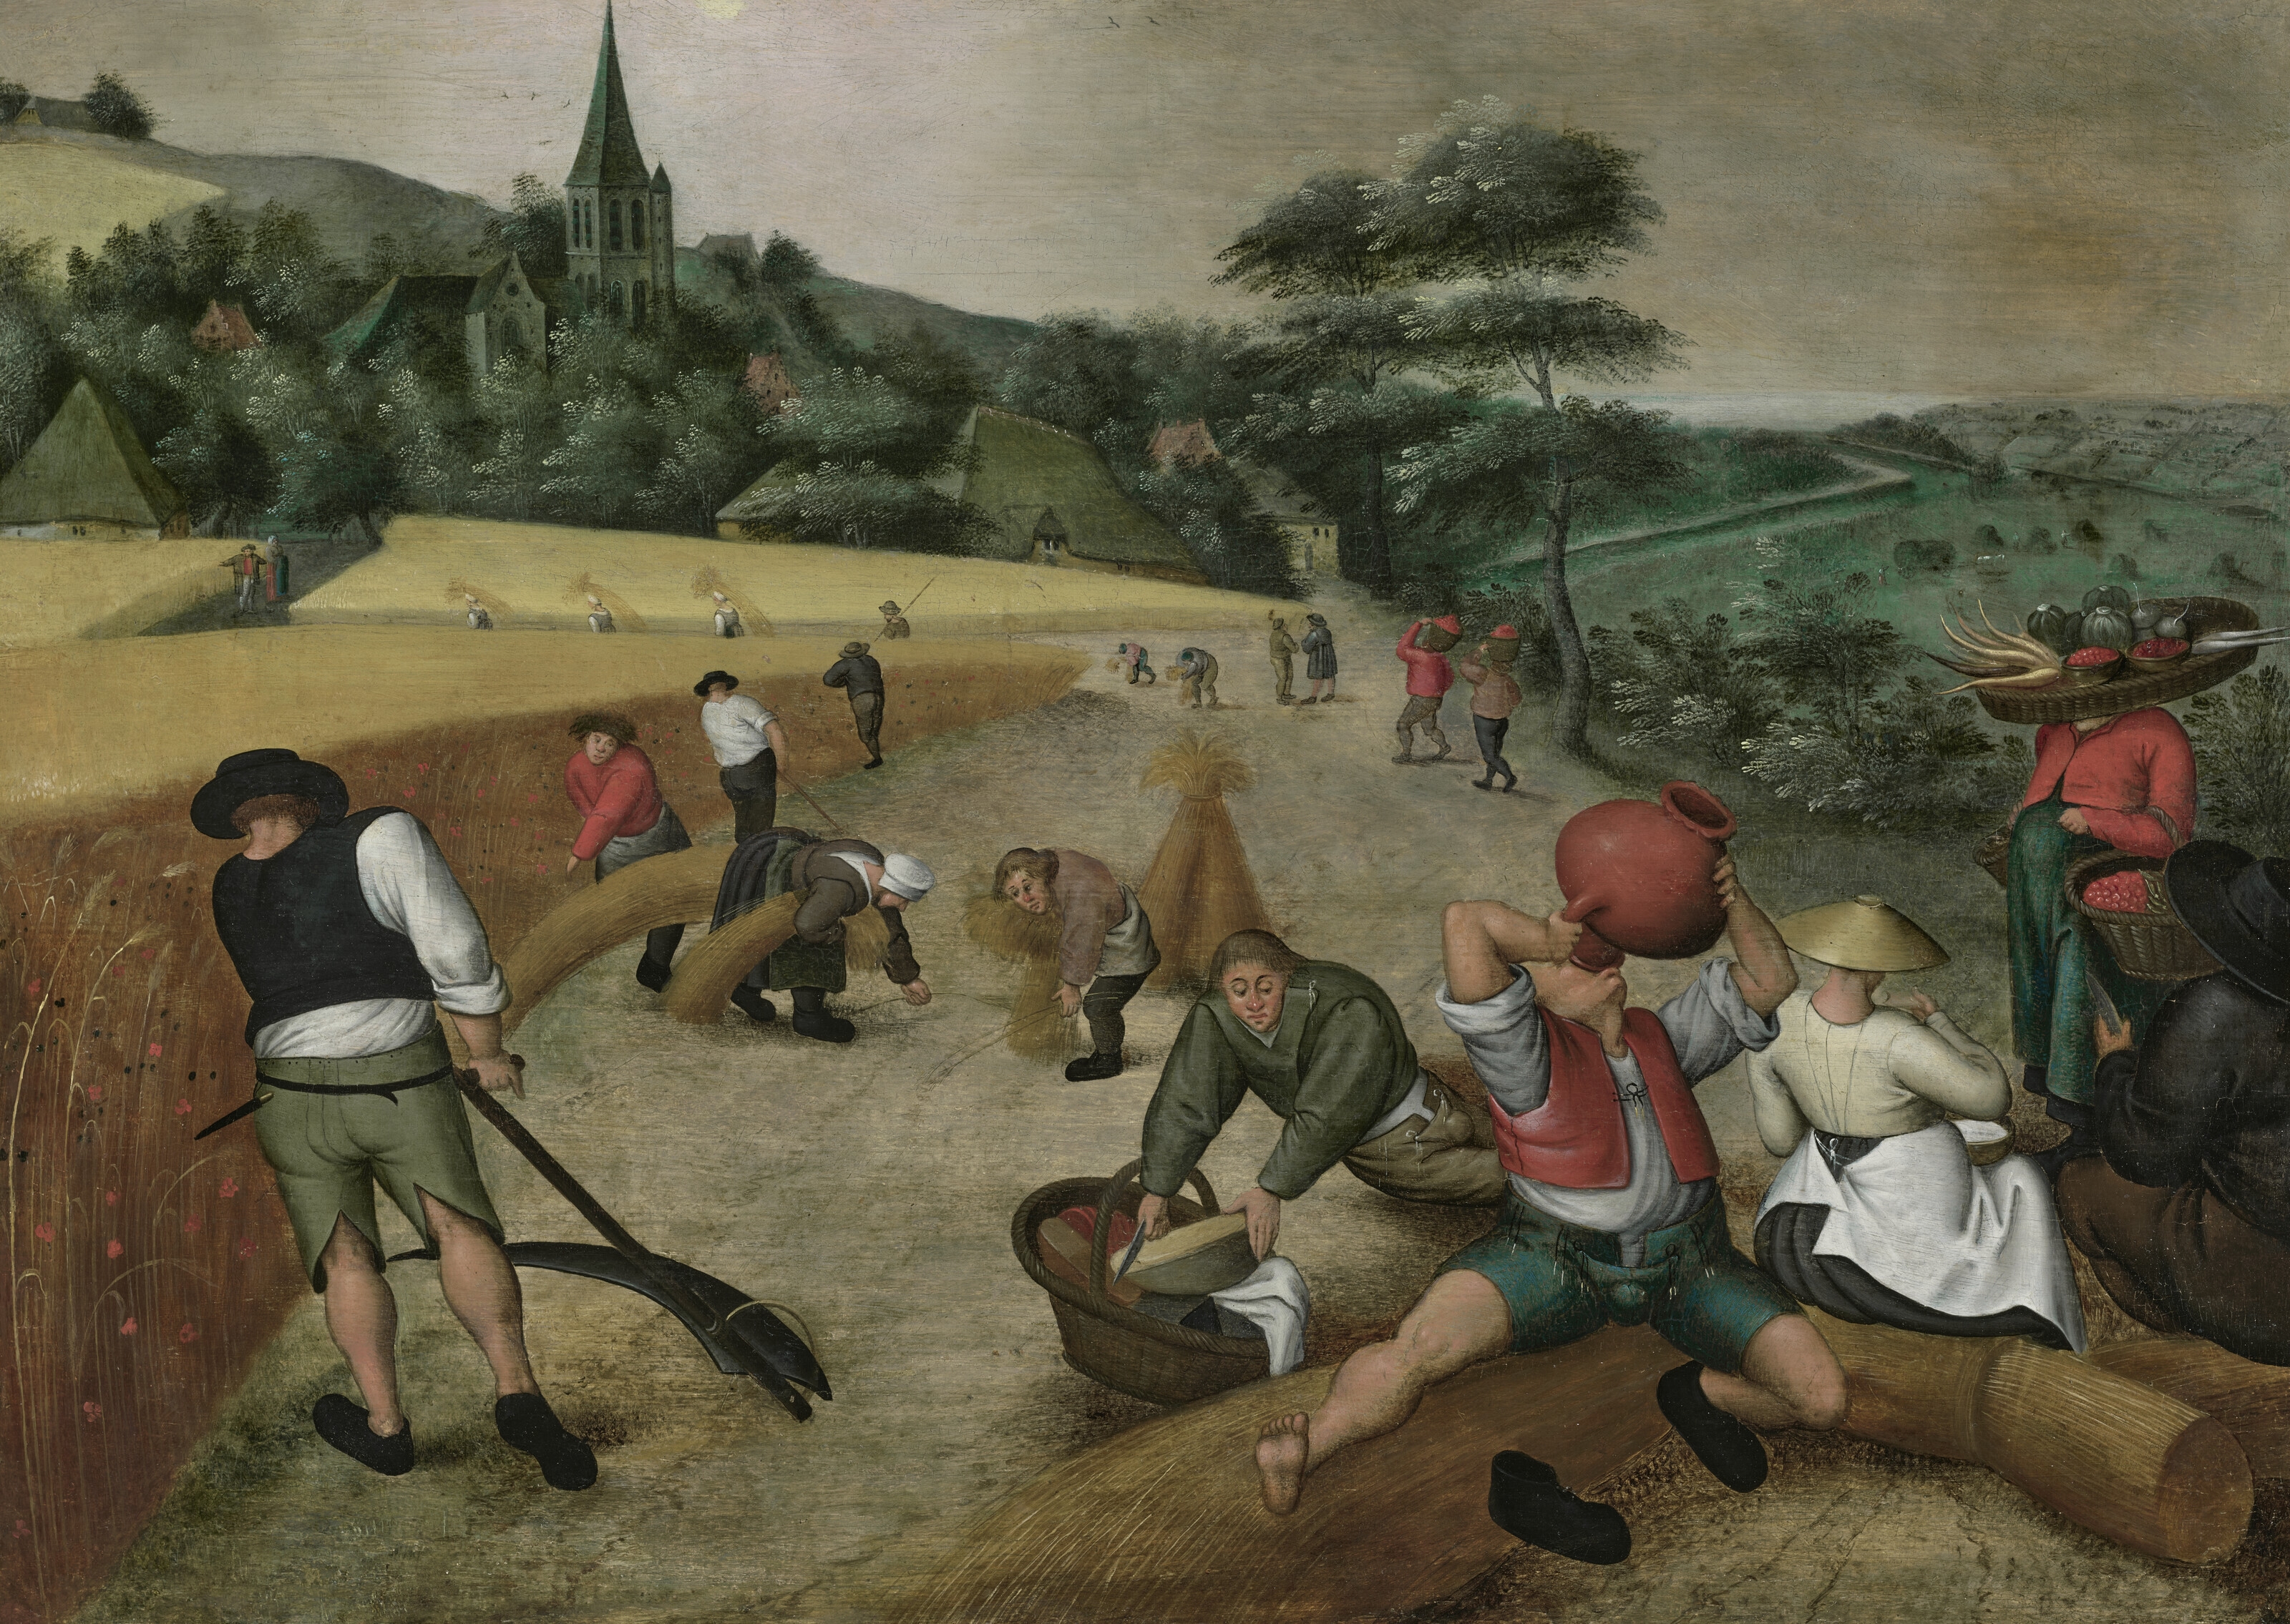 Summer: The Harvesters by Pieter Brueghel the Younger